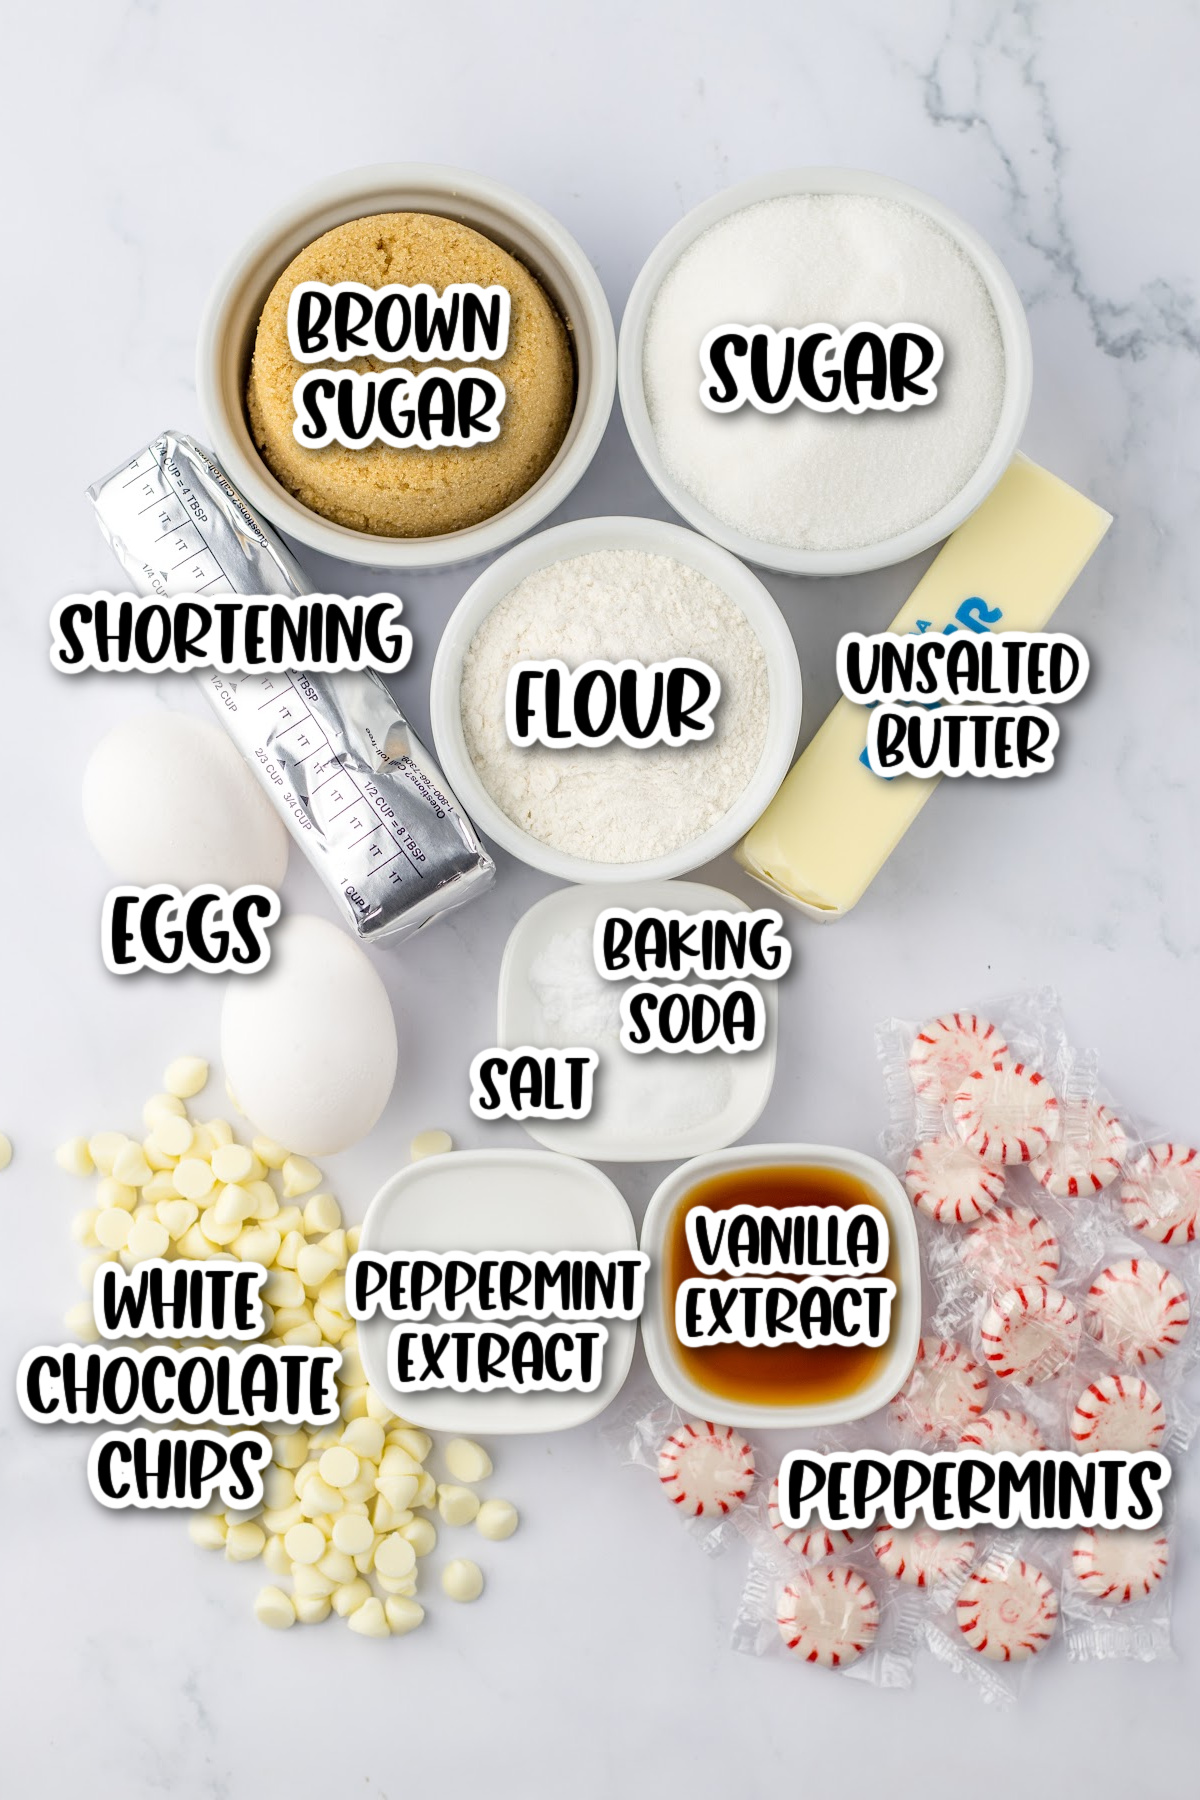 A list of ingredients for a white chocolate peppermint cookie.